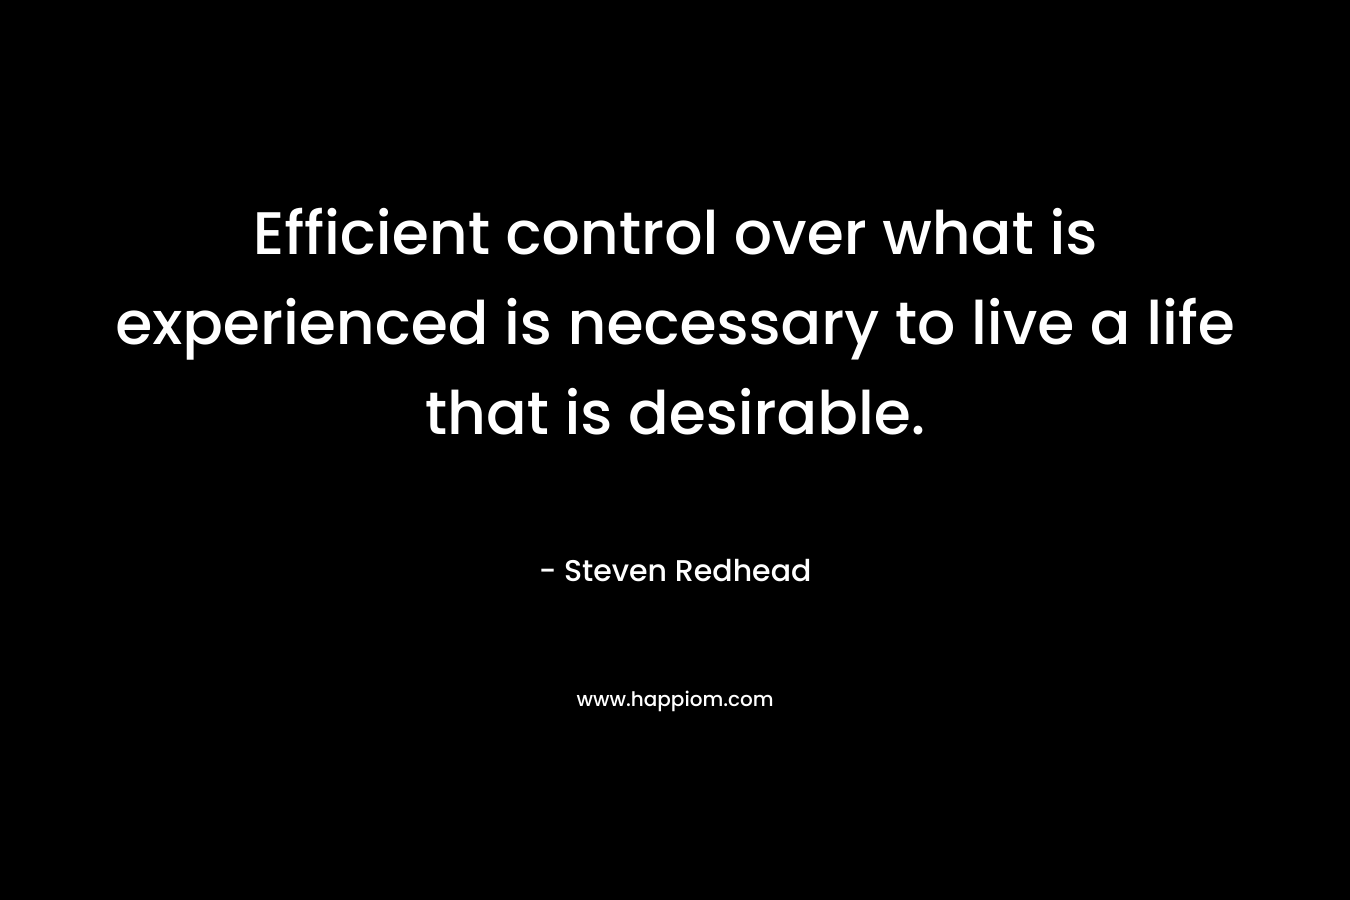 Efficient control over what is experienced is necessary to live a life that is desirable.